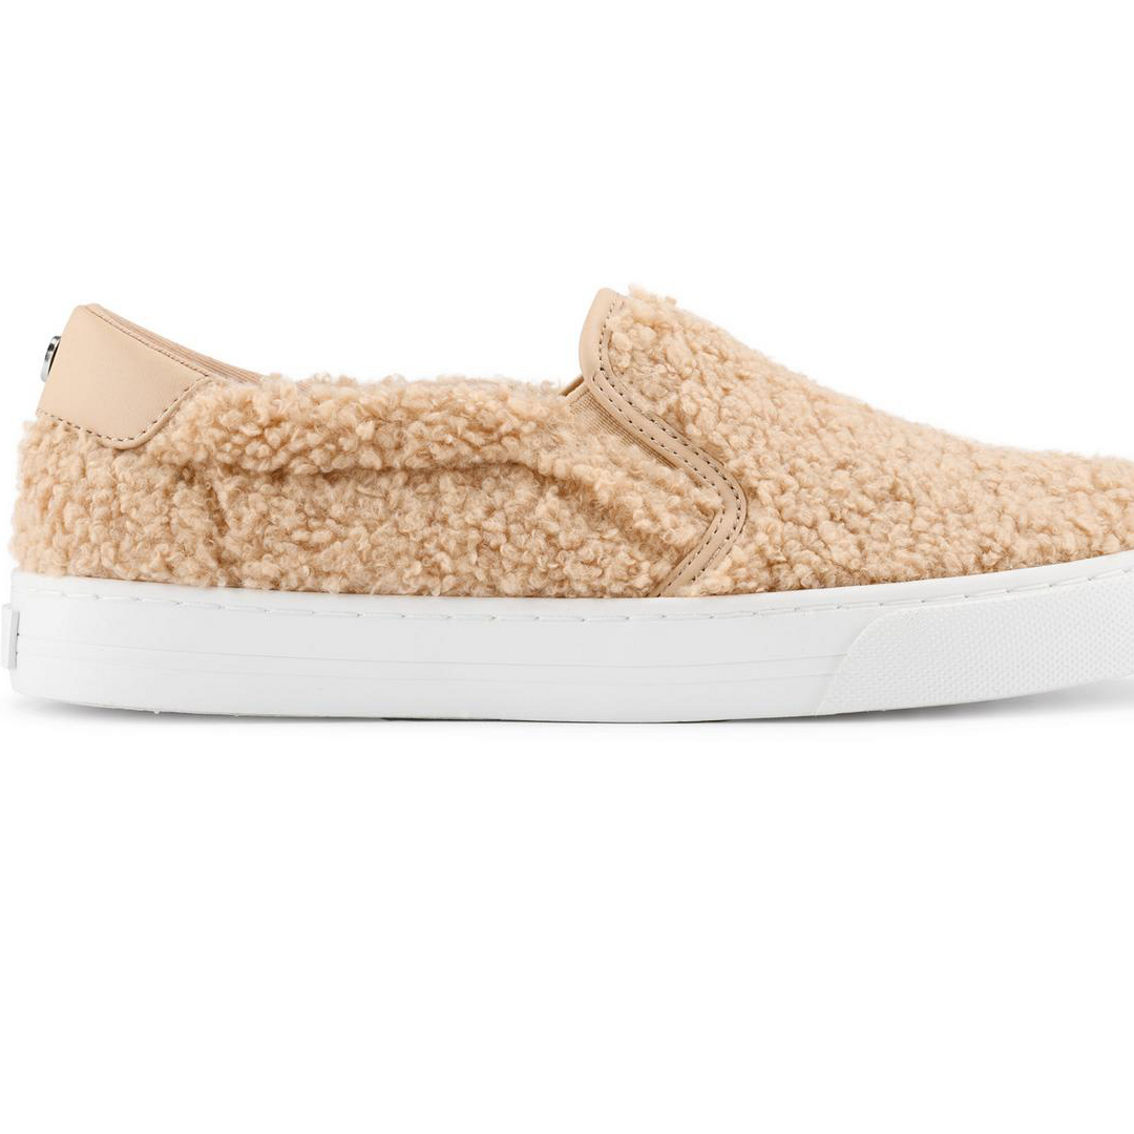 Lala 9 Womens Slip-On Casual and Fashion Sneakers - Image 4 of 4